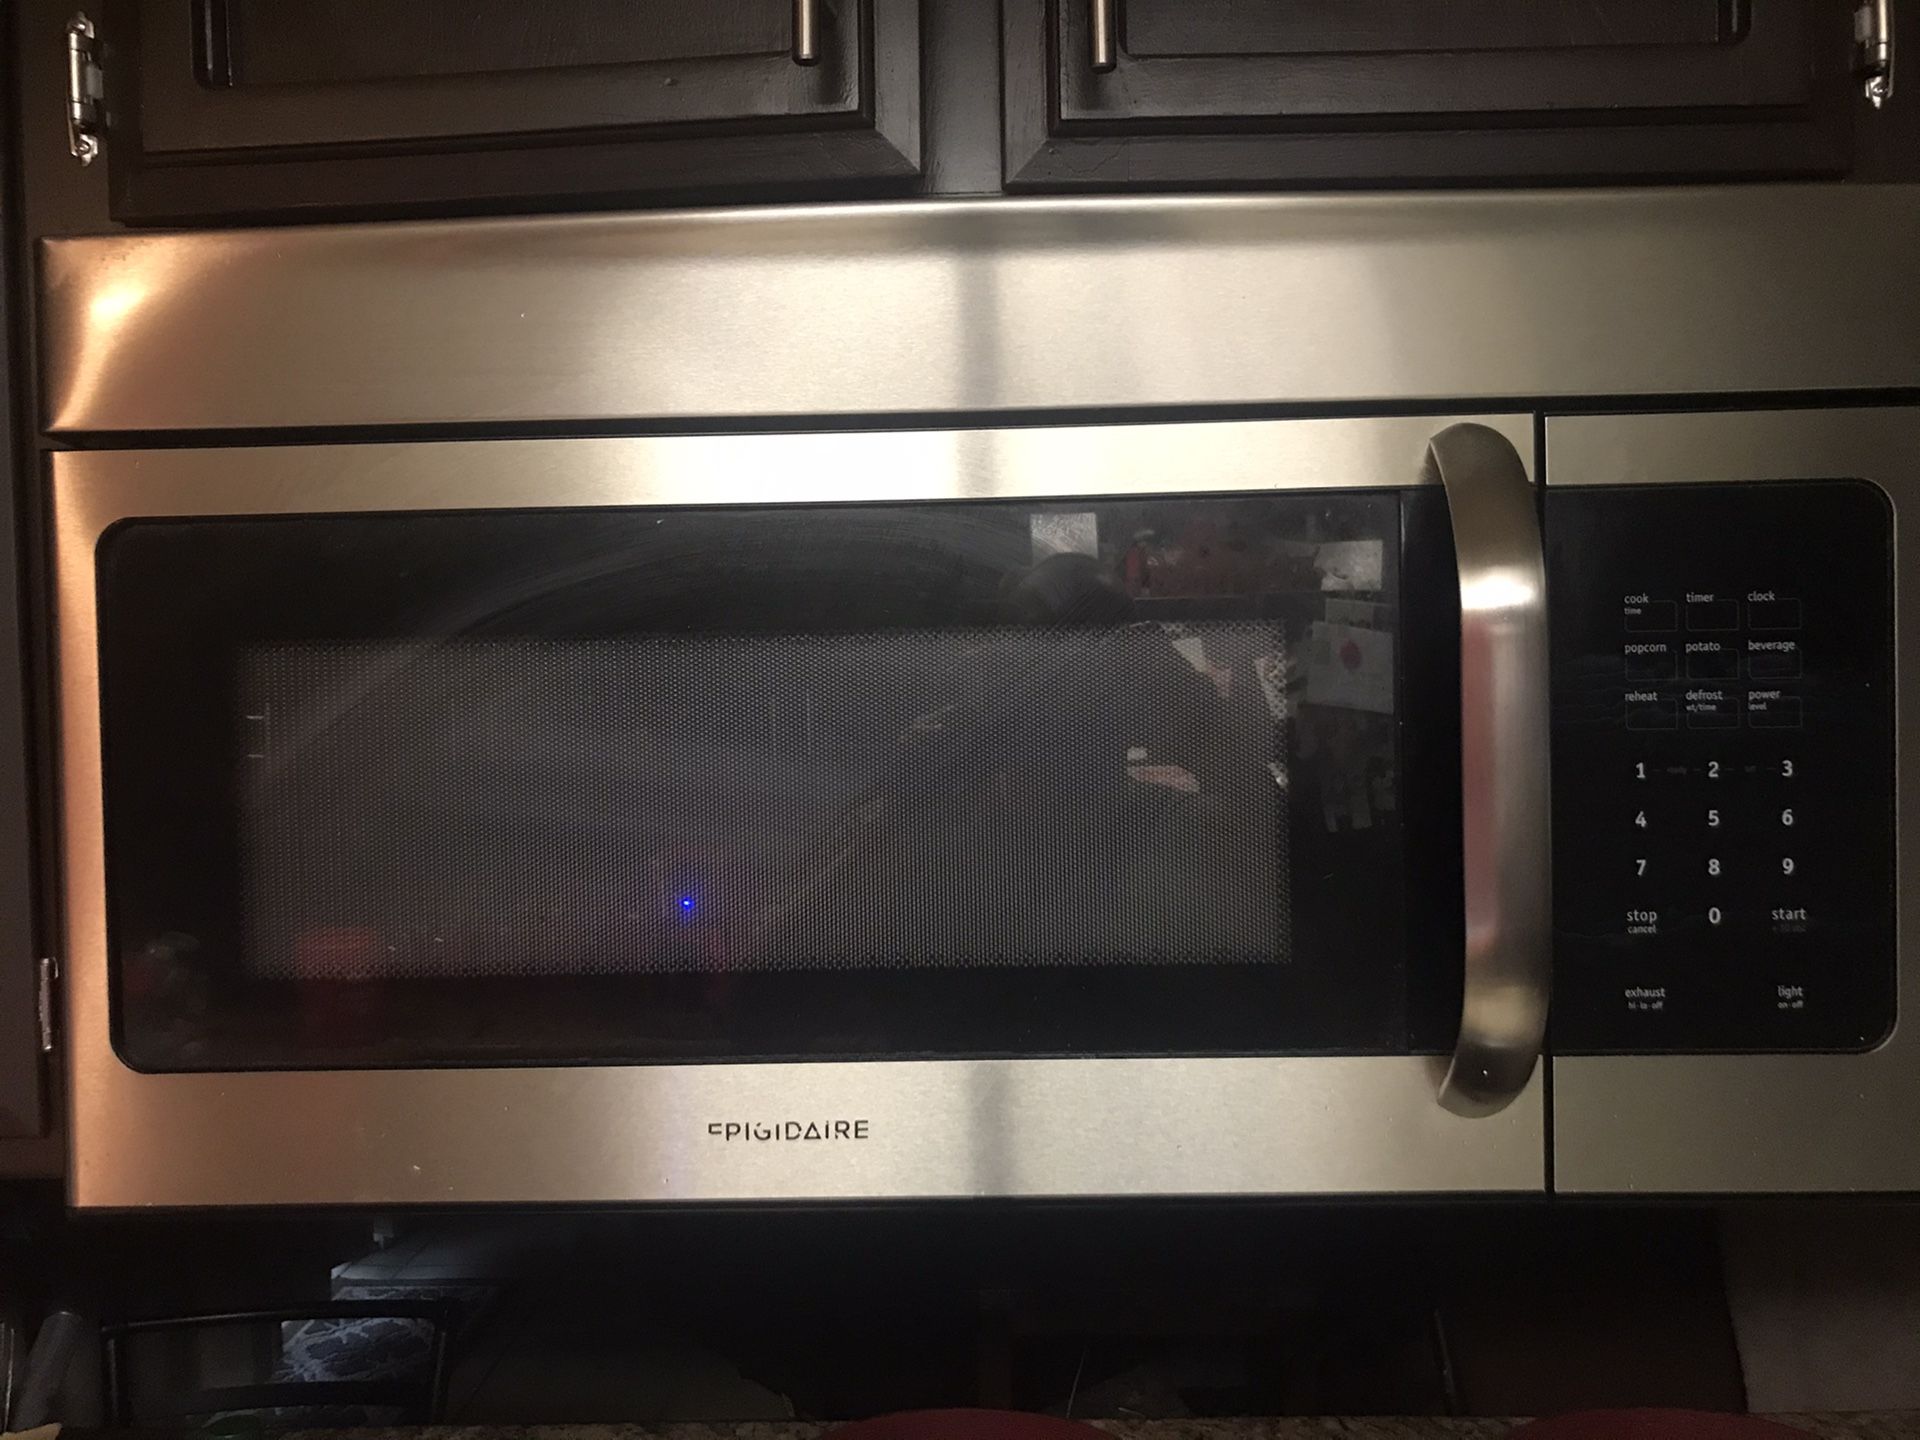 Frigidaire Over the range Microwave